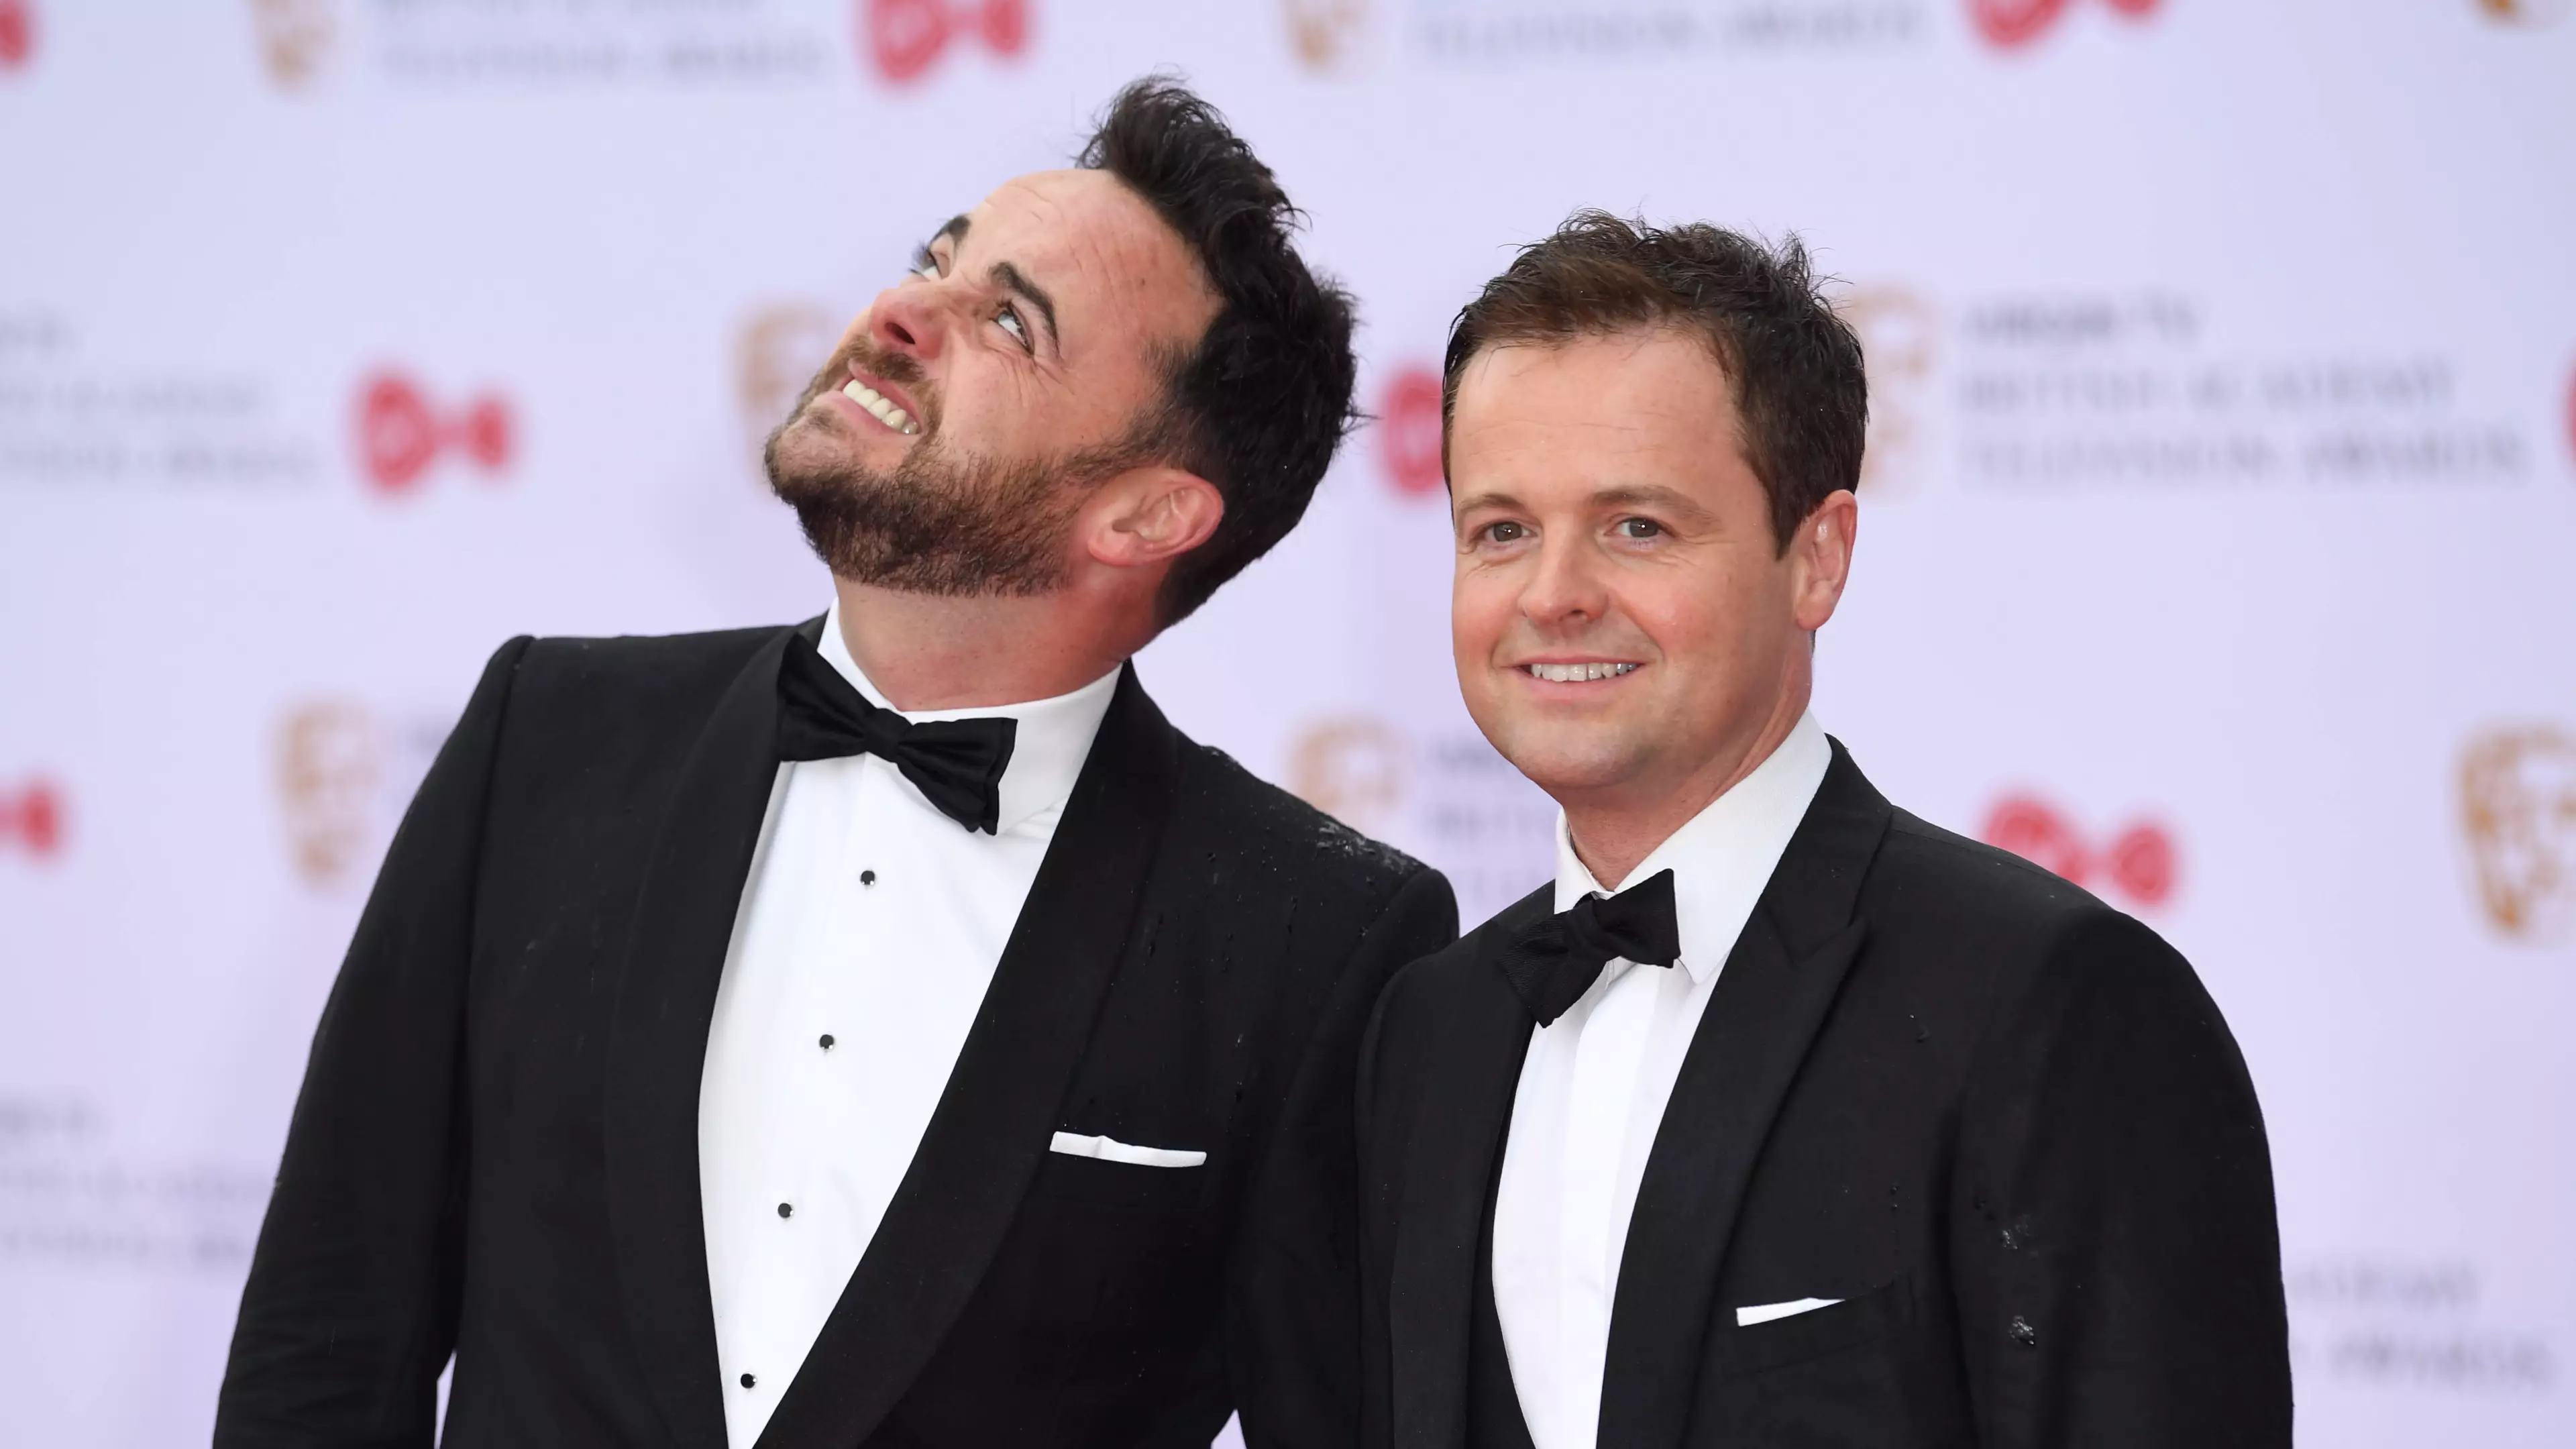 Ant And Dec Have Had An Incredible Career, And They Deserve It Most